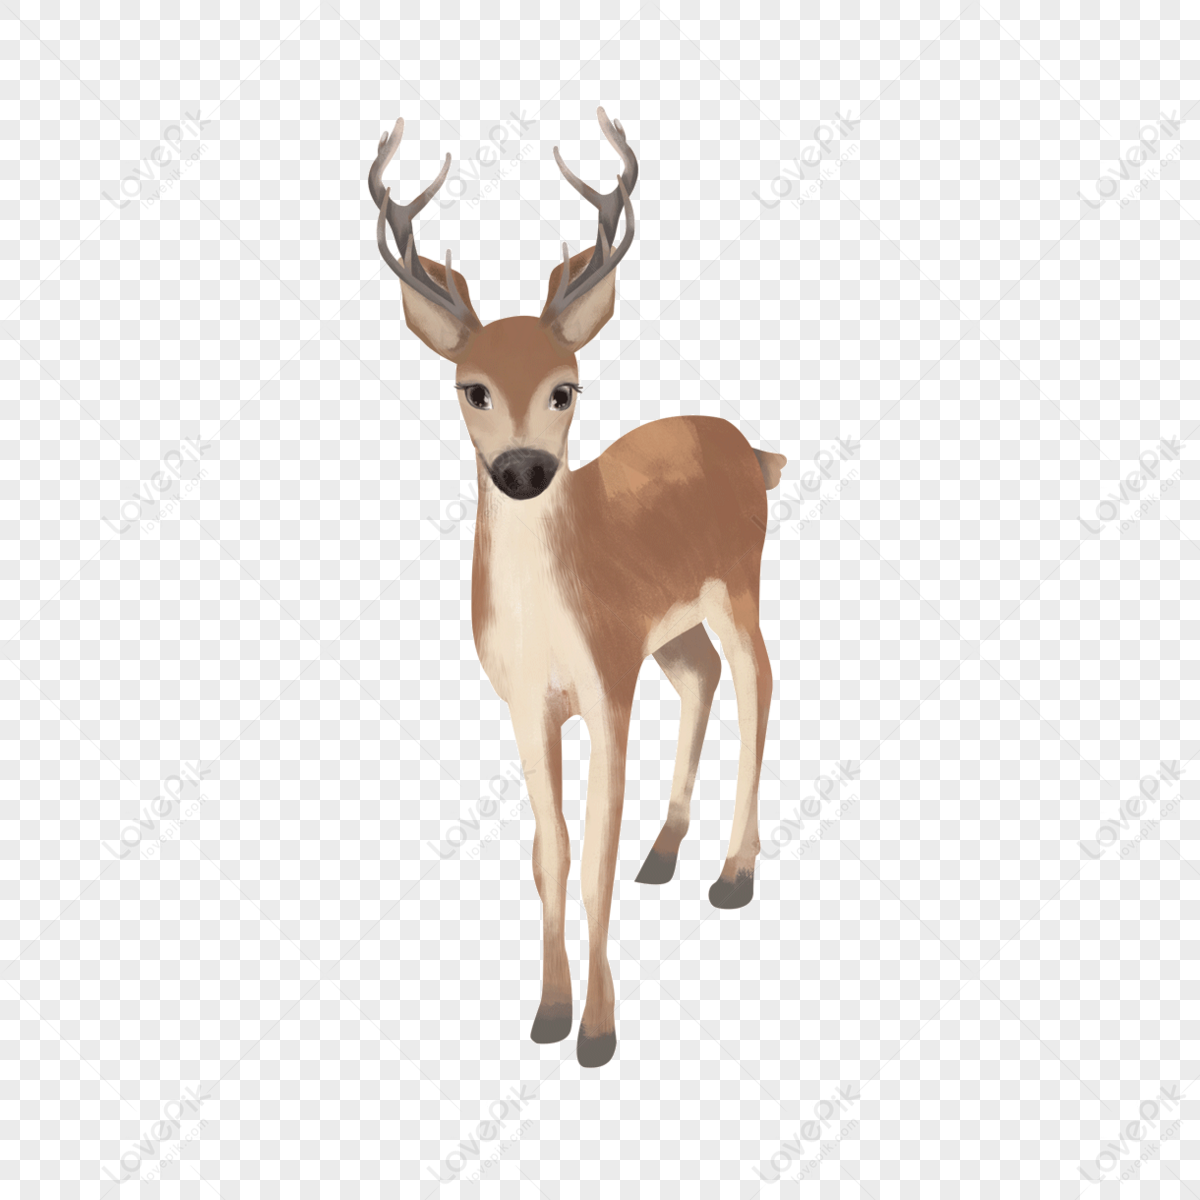 Standing frontal small animal mammal elk clipart,antlers,deer png transparent background